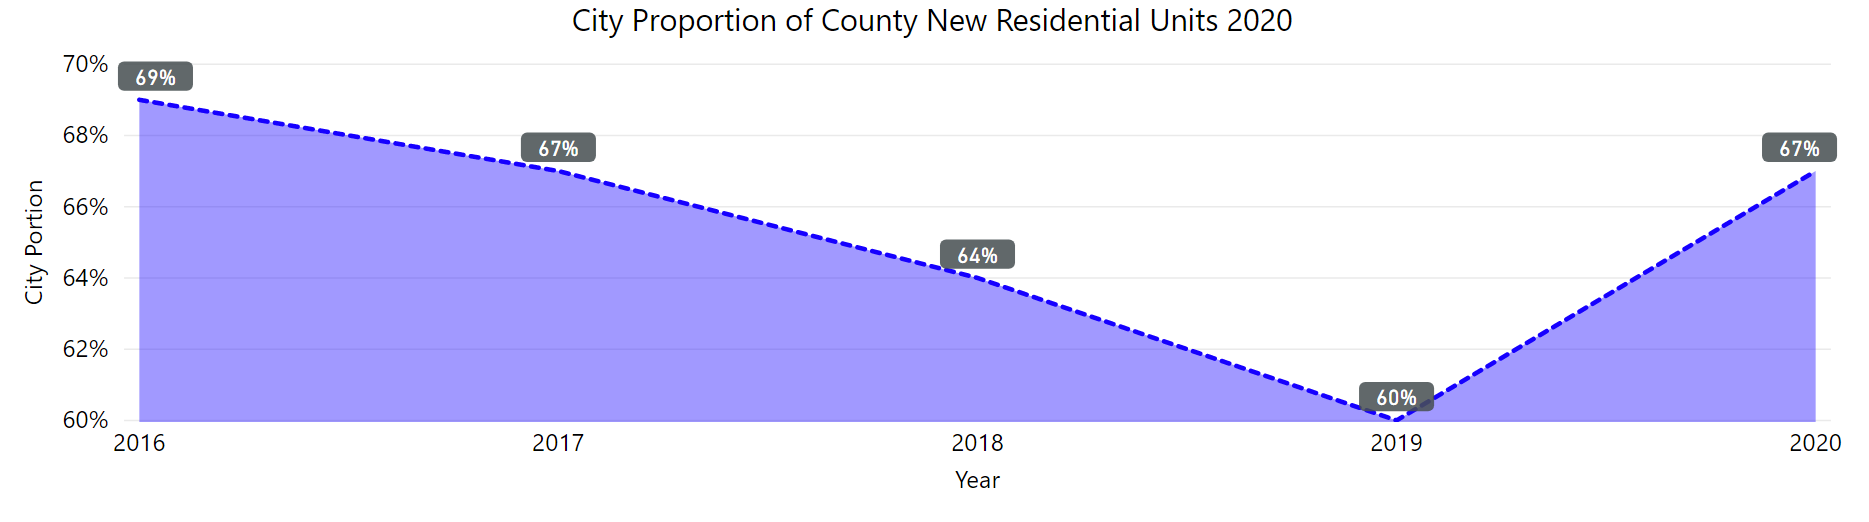 city proportion of county new residential units from 2016 to 2020. The percentage decreased from 2016 to 2019 and then increased in 2020.